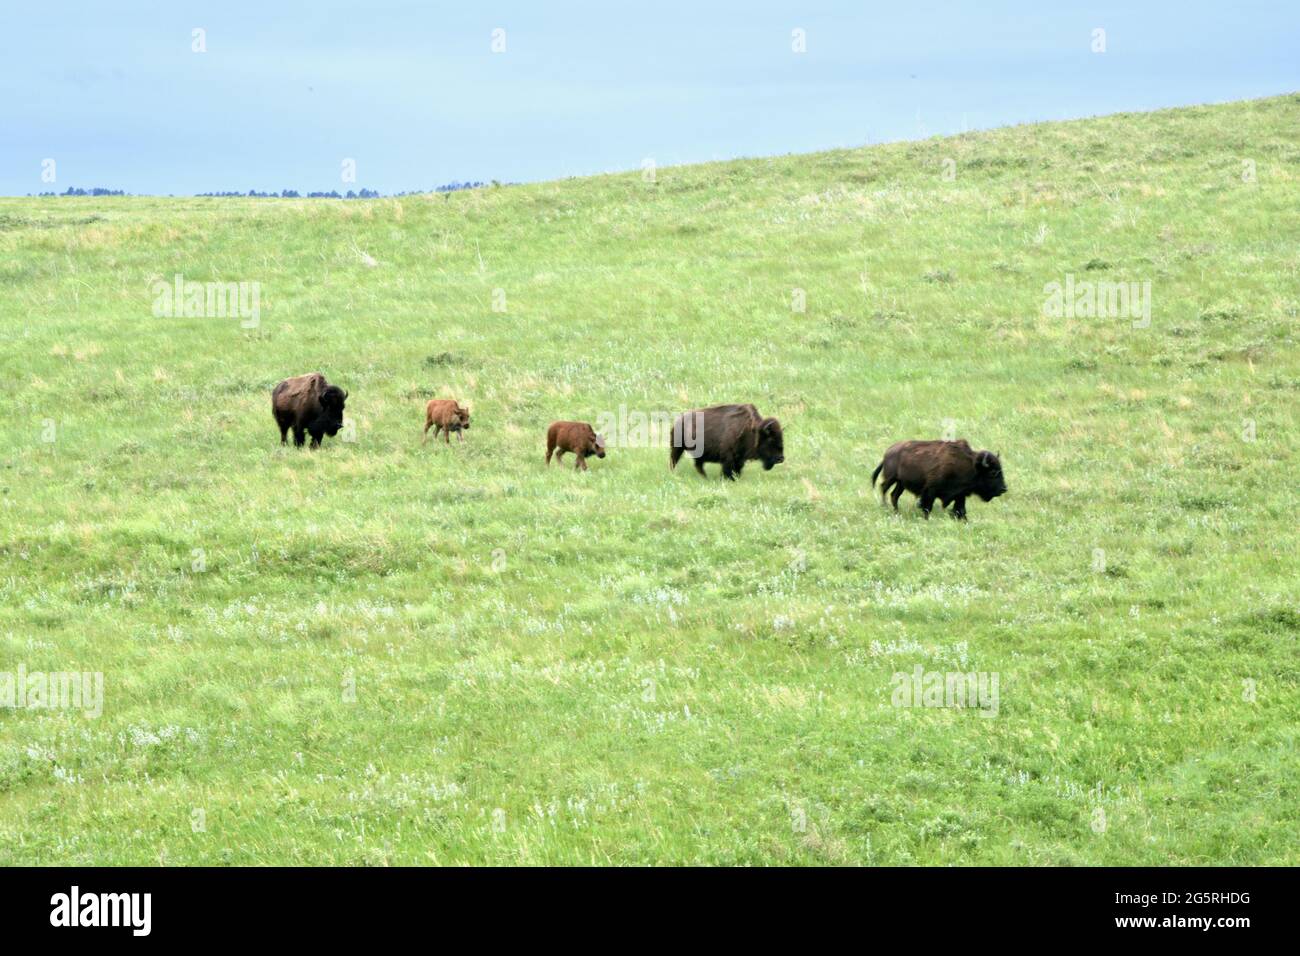 Bison grazing in Custer State Park on the Wildlife Loop Drive through the grasslands. Animal Viewing in Custer, South Dakota, USA Stock Photo